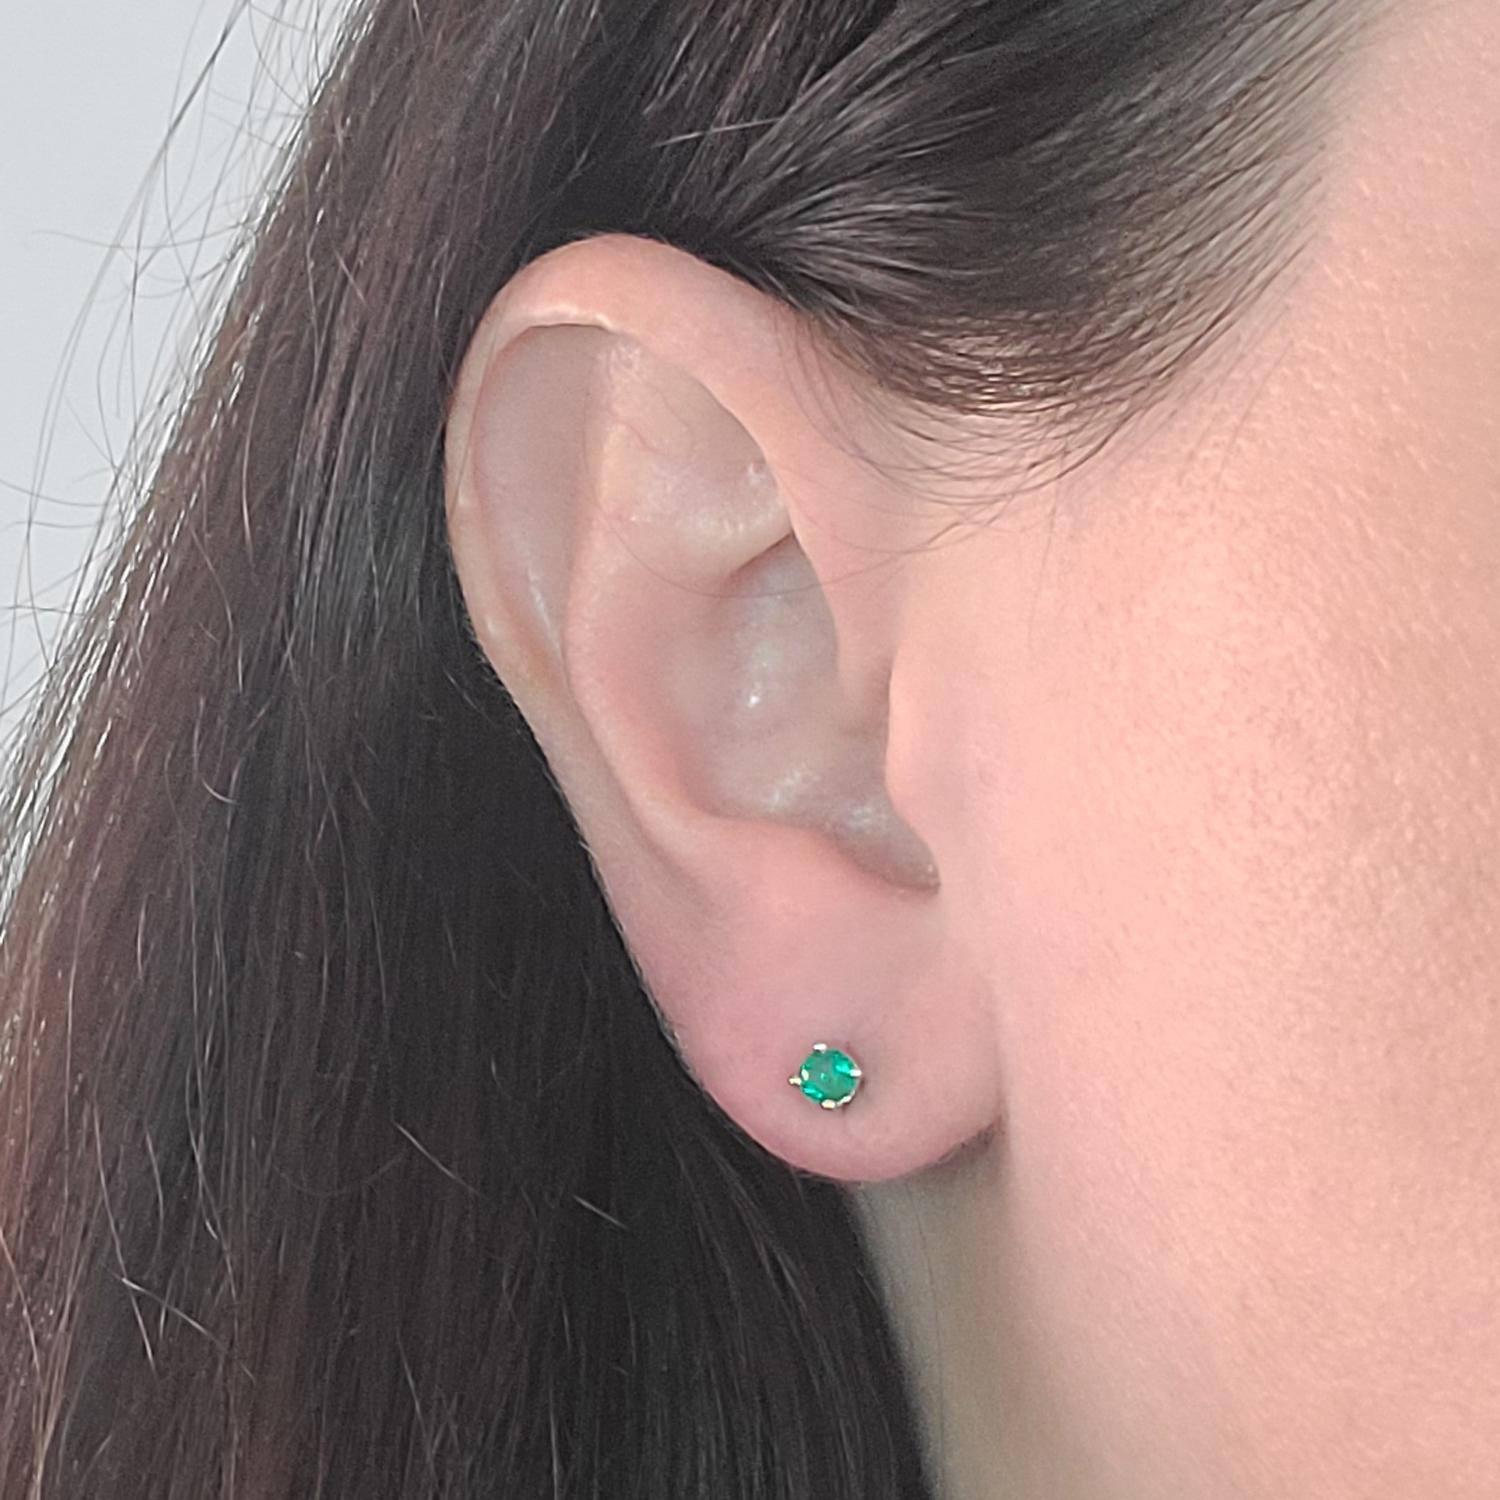 18 Karat White Gold Small Stud Earrings Featuring 2 Round Emeralds Totaling Approximately 0.30 Carat. Pierced Post with Screw Back. Great For Children or a Second Piercing. Finished Weight is 0.8 Grams.